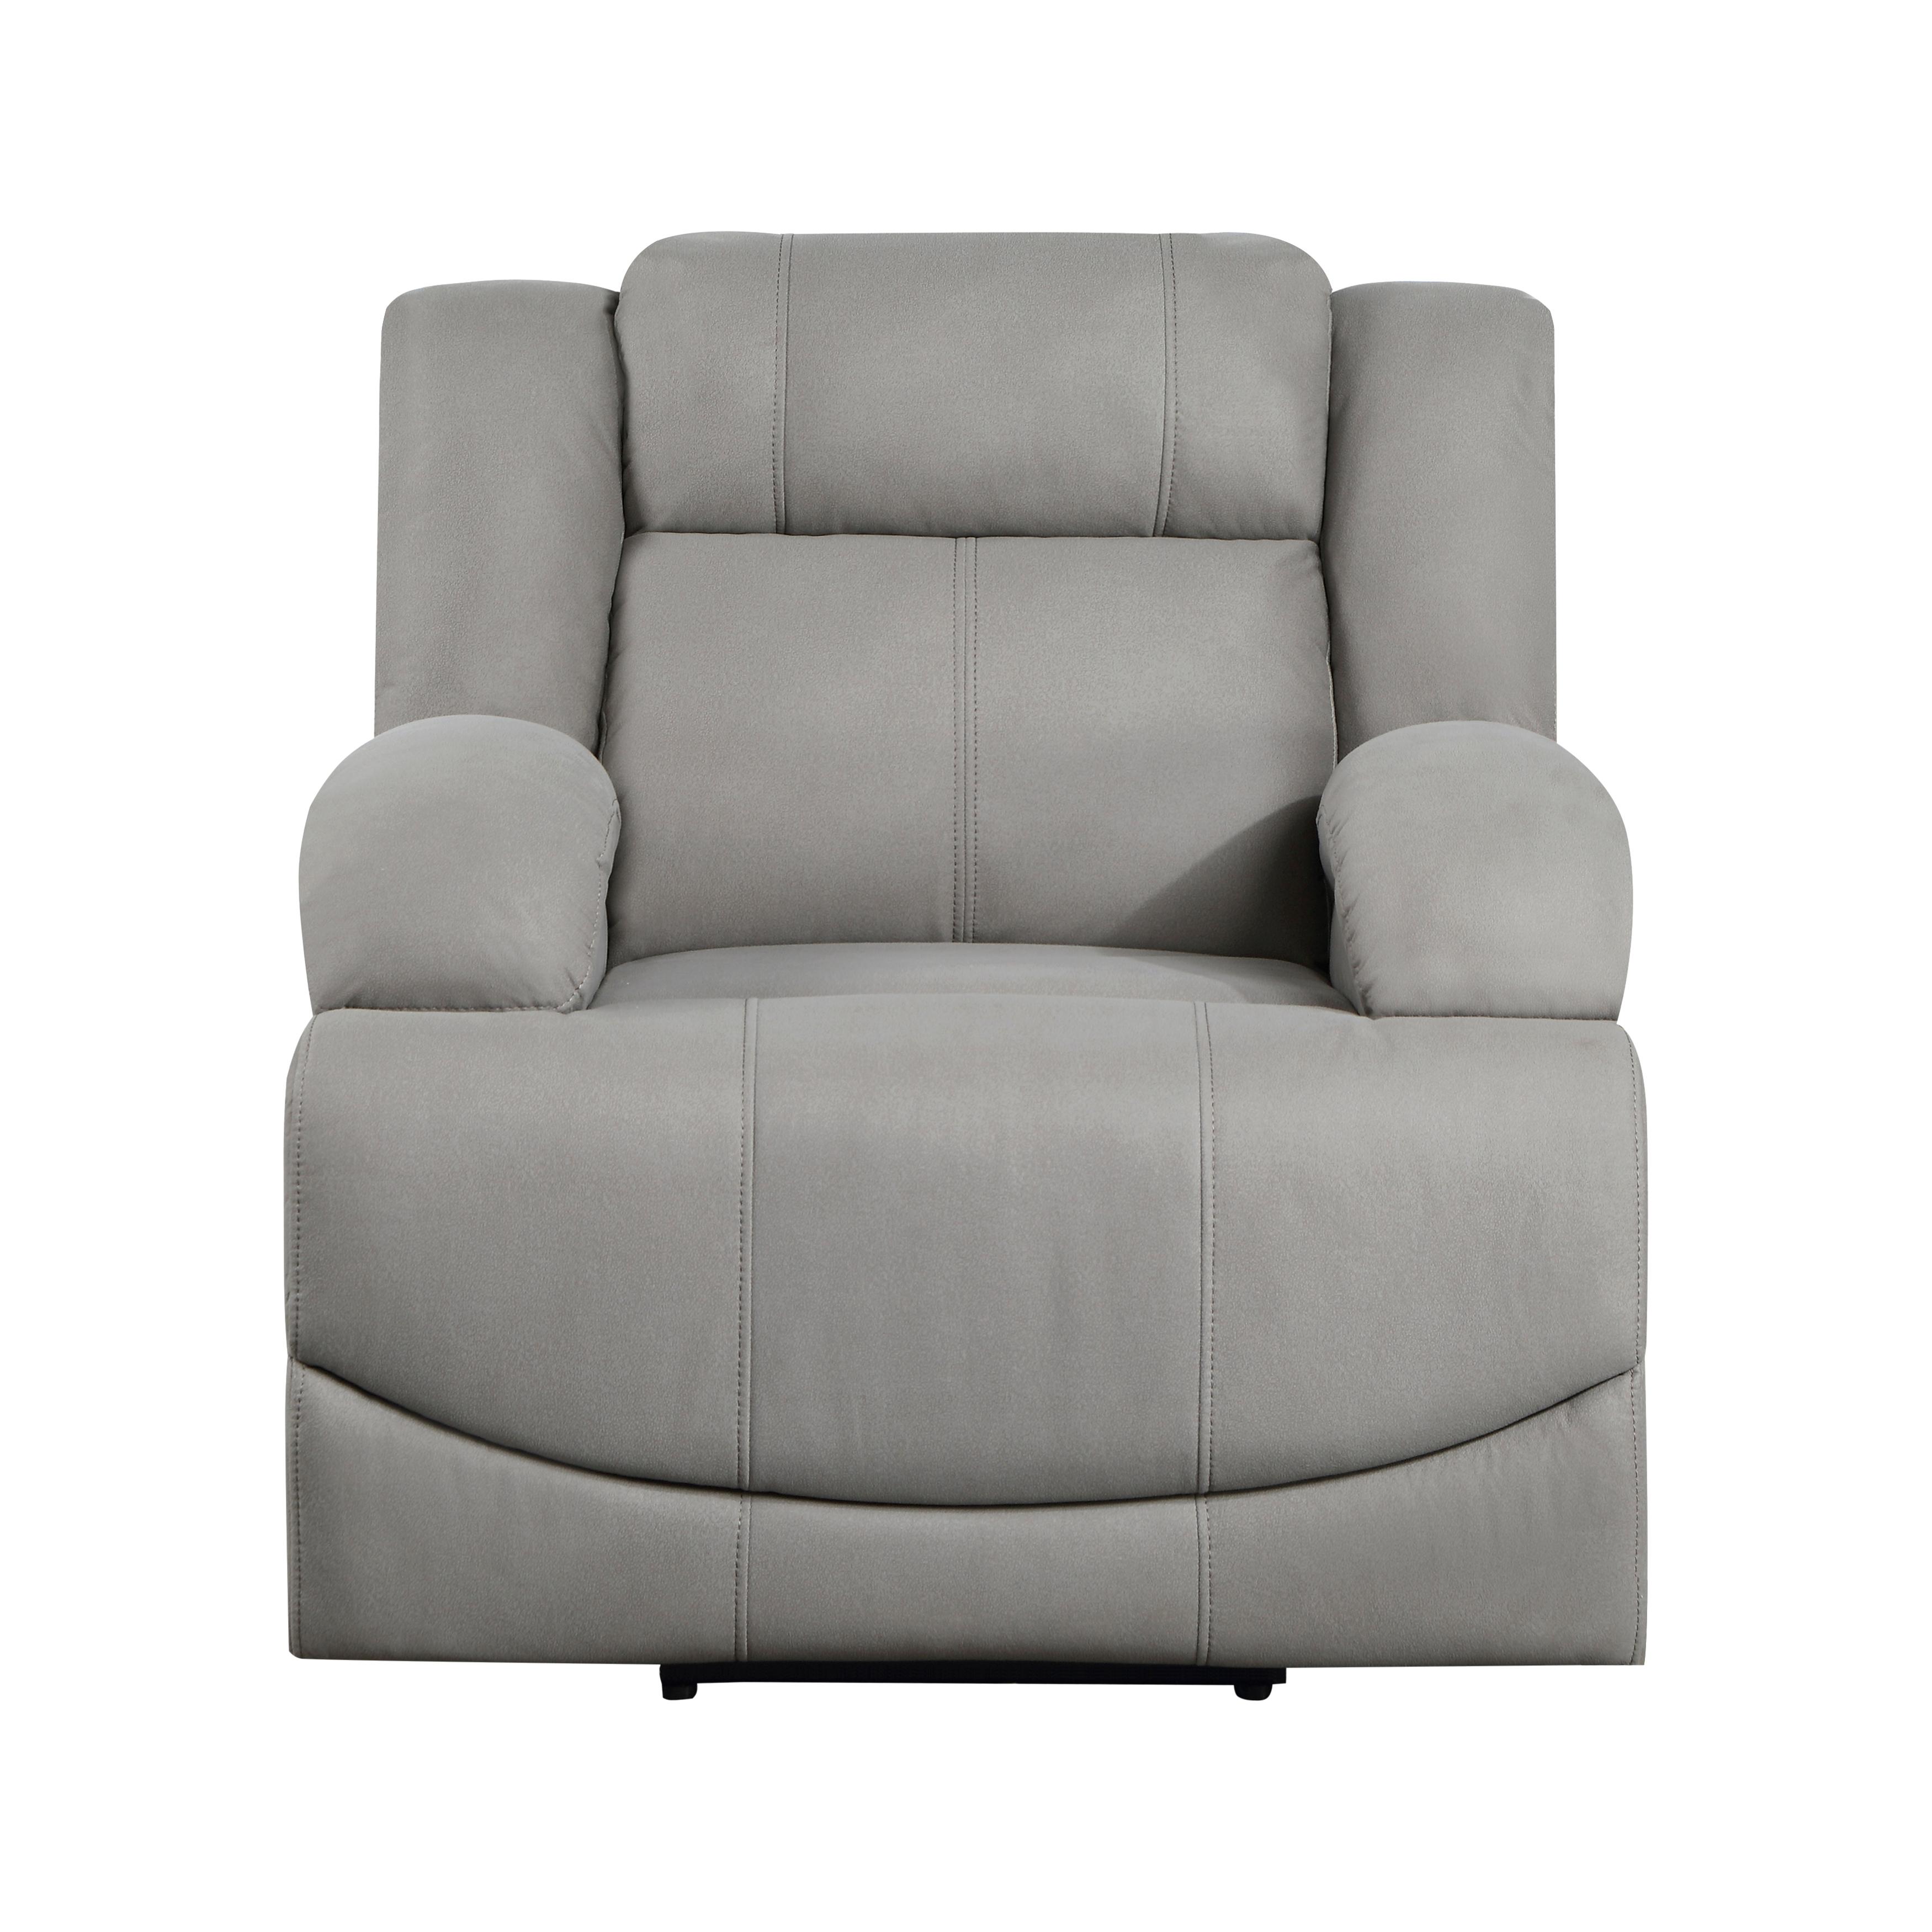 Transitional Power Reclining Chair 9207GRY-1PW Camryn 9207GRY-1PW in Gray Microfiber